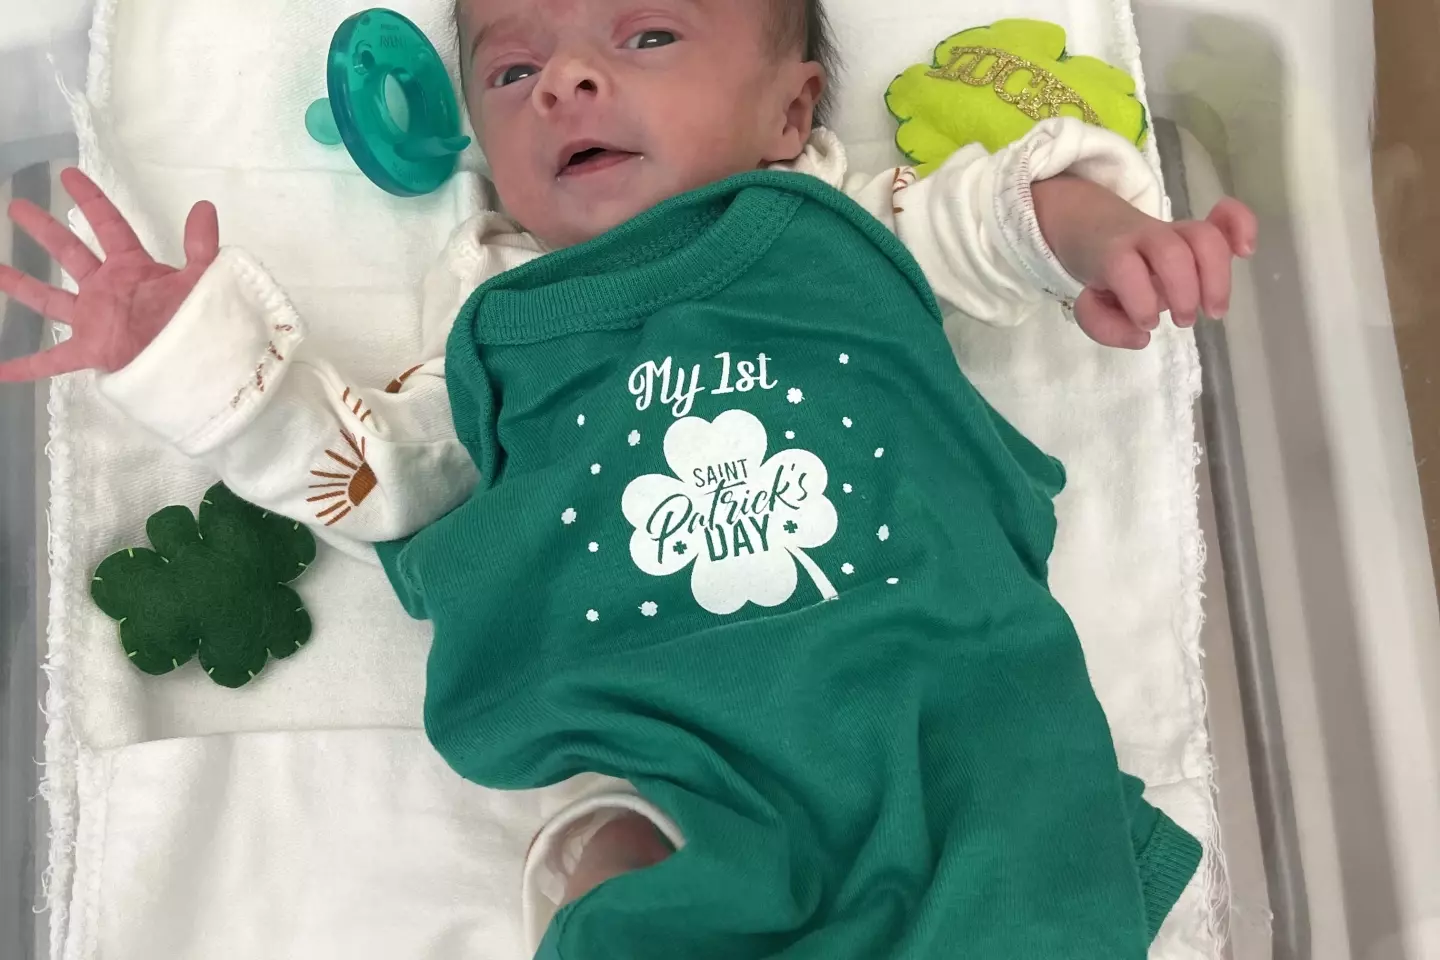 A newborn baby in a green onesies surrounded by plush shamrocks.